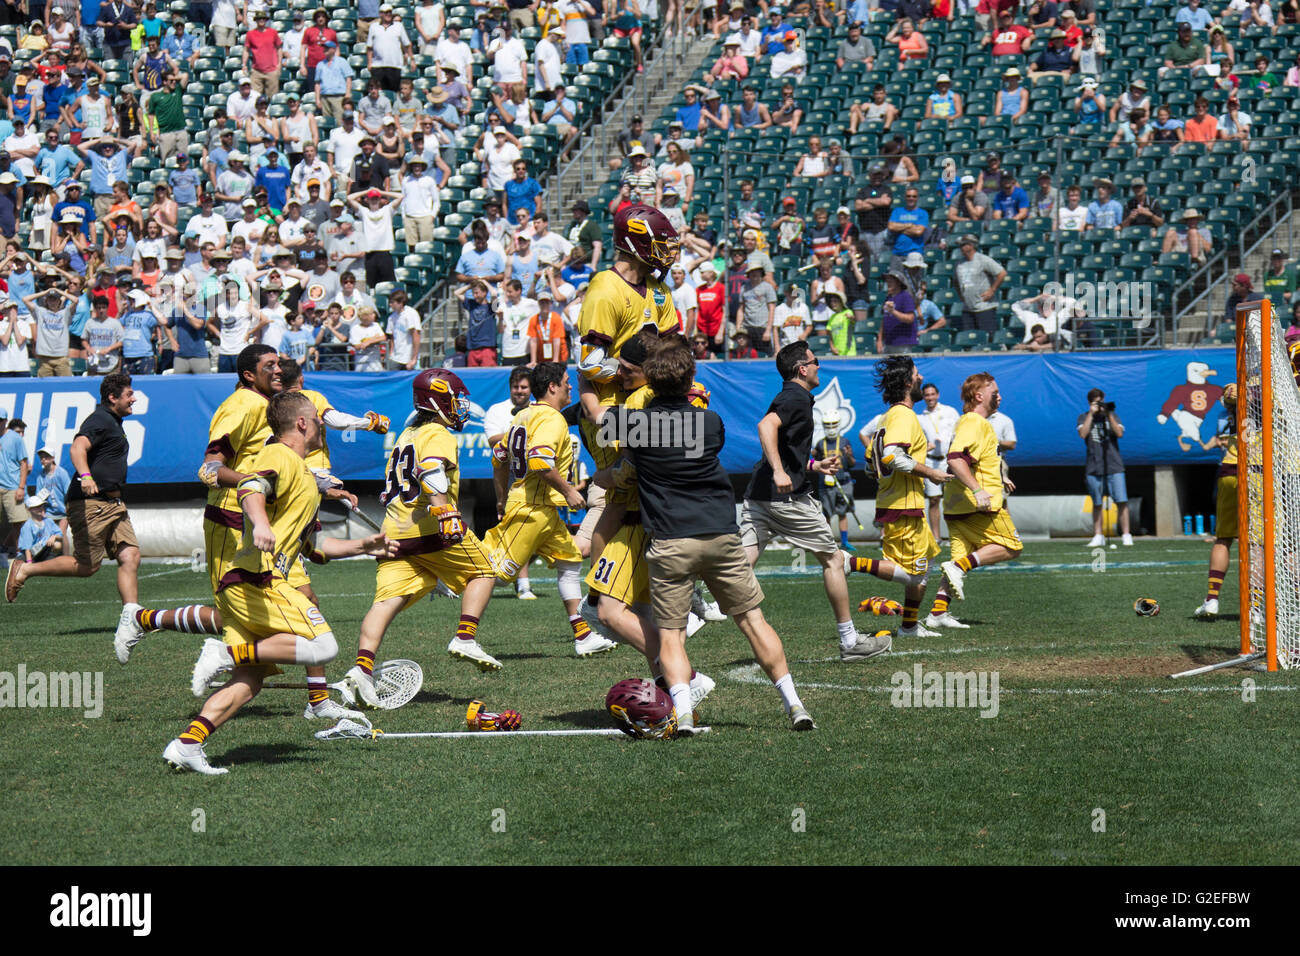 May 29, 2016: Salisbury Sea Gulls run onto the field to celebrate the win following the NCAA Division III championship lacrosse match between the Salisbury Sea Gulls and the Tufts Jumbos at Lincoln Financial Field in Philadelphia, Pennsylvania. The Salisbury Sea Gulls won 14-13 to become the NCAA Division III National Champions. Christopher Szagola/CSM Stock Photo